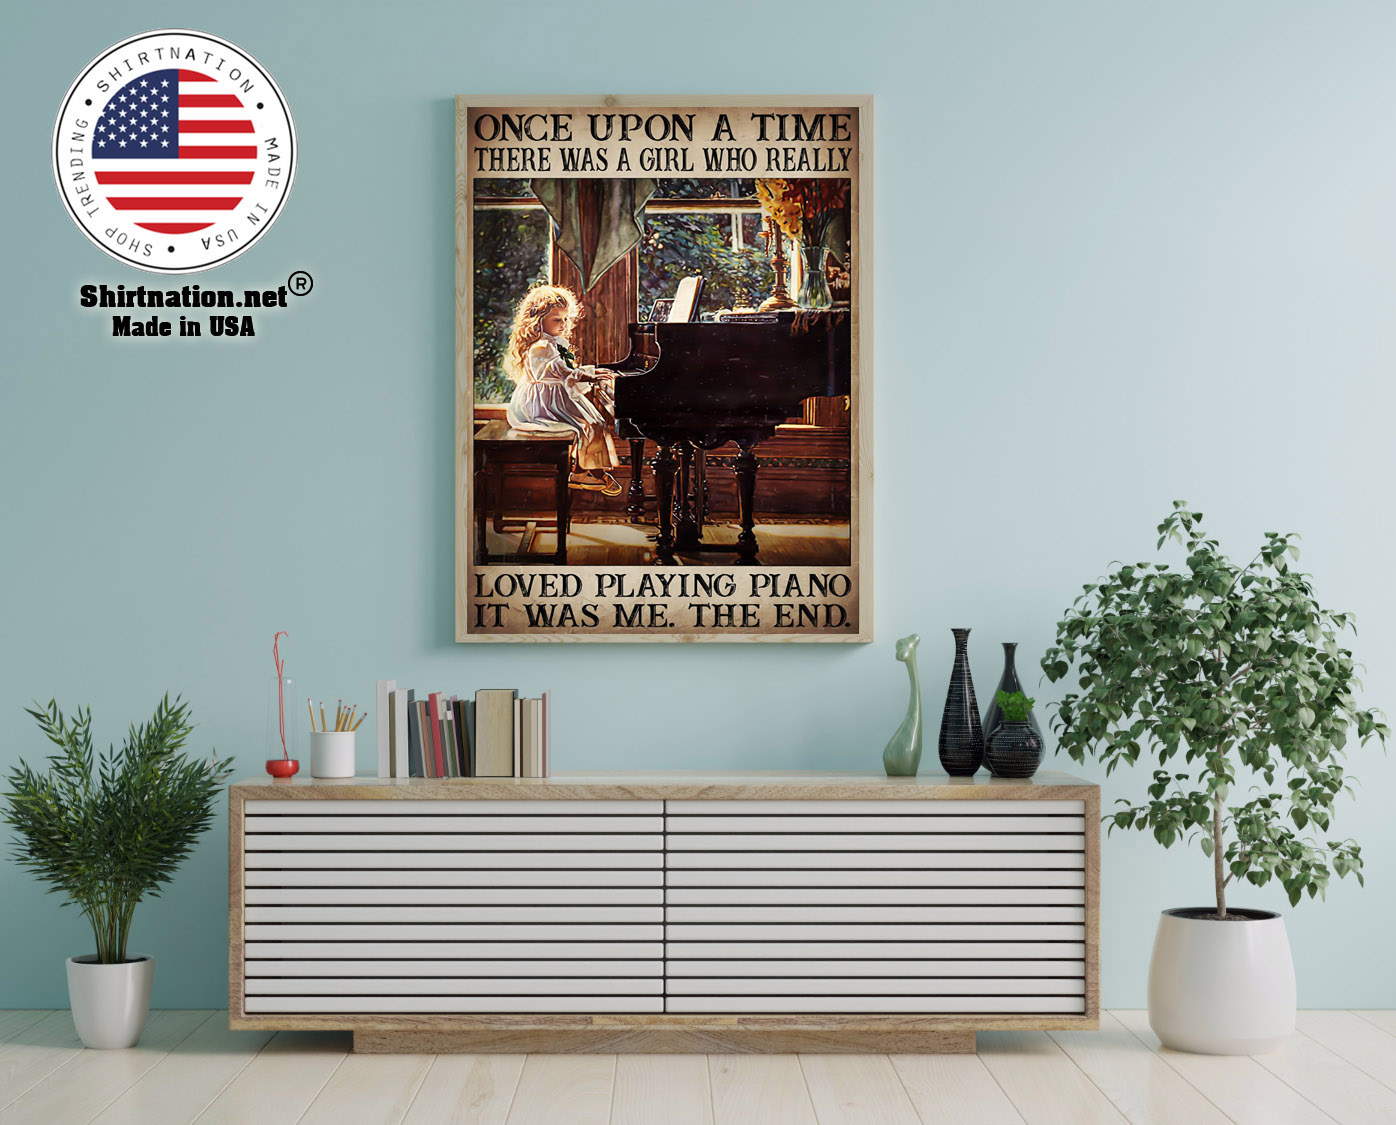 Once upon a time there was a girl who really loved playing piano poster 12